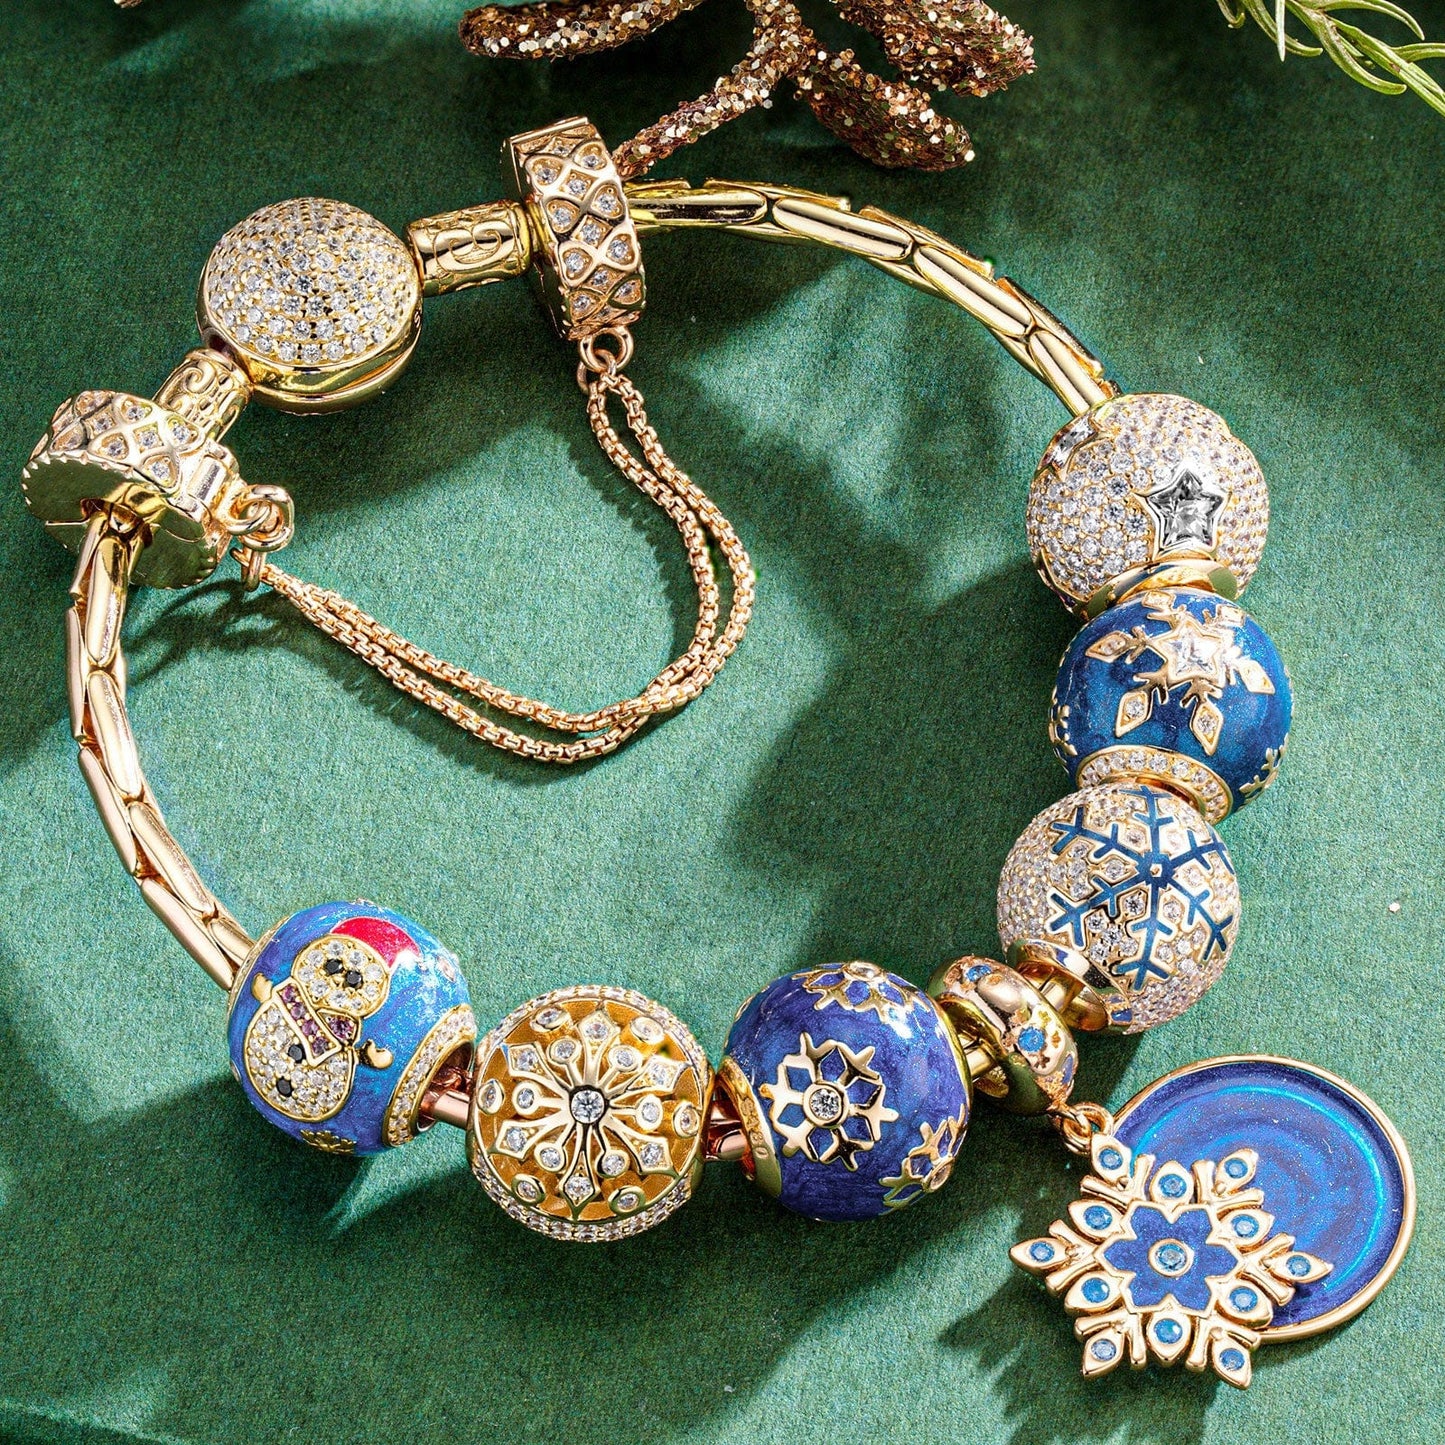 Sterling Silver Snowflake Dreams Charms Bracelet Set With Enamel In 14K Gold Plated